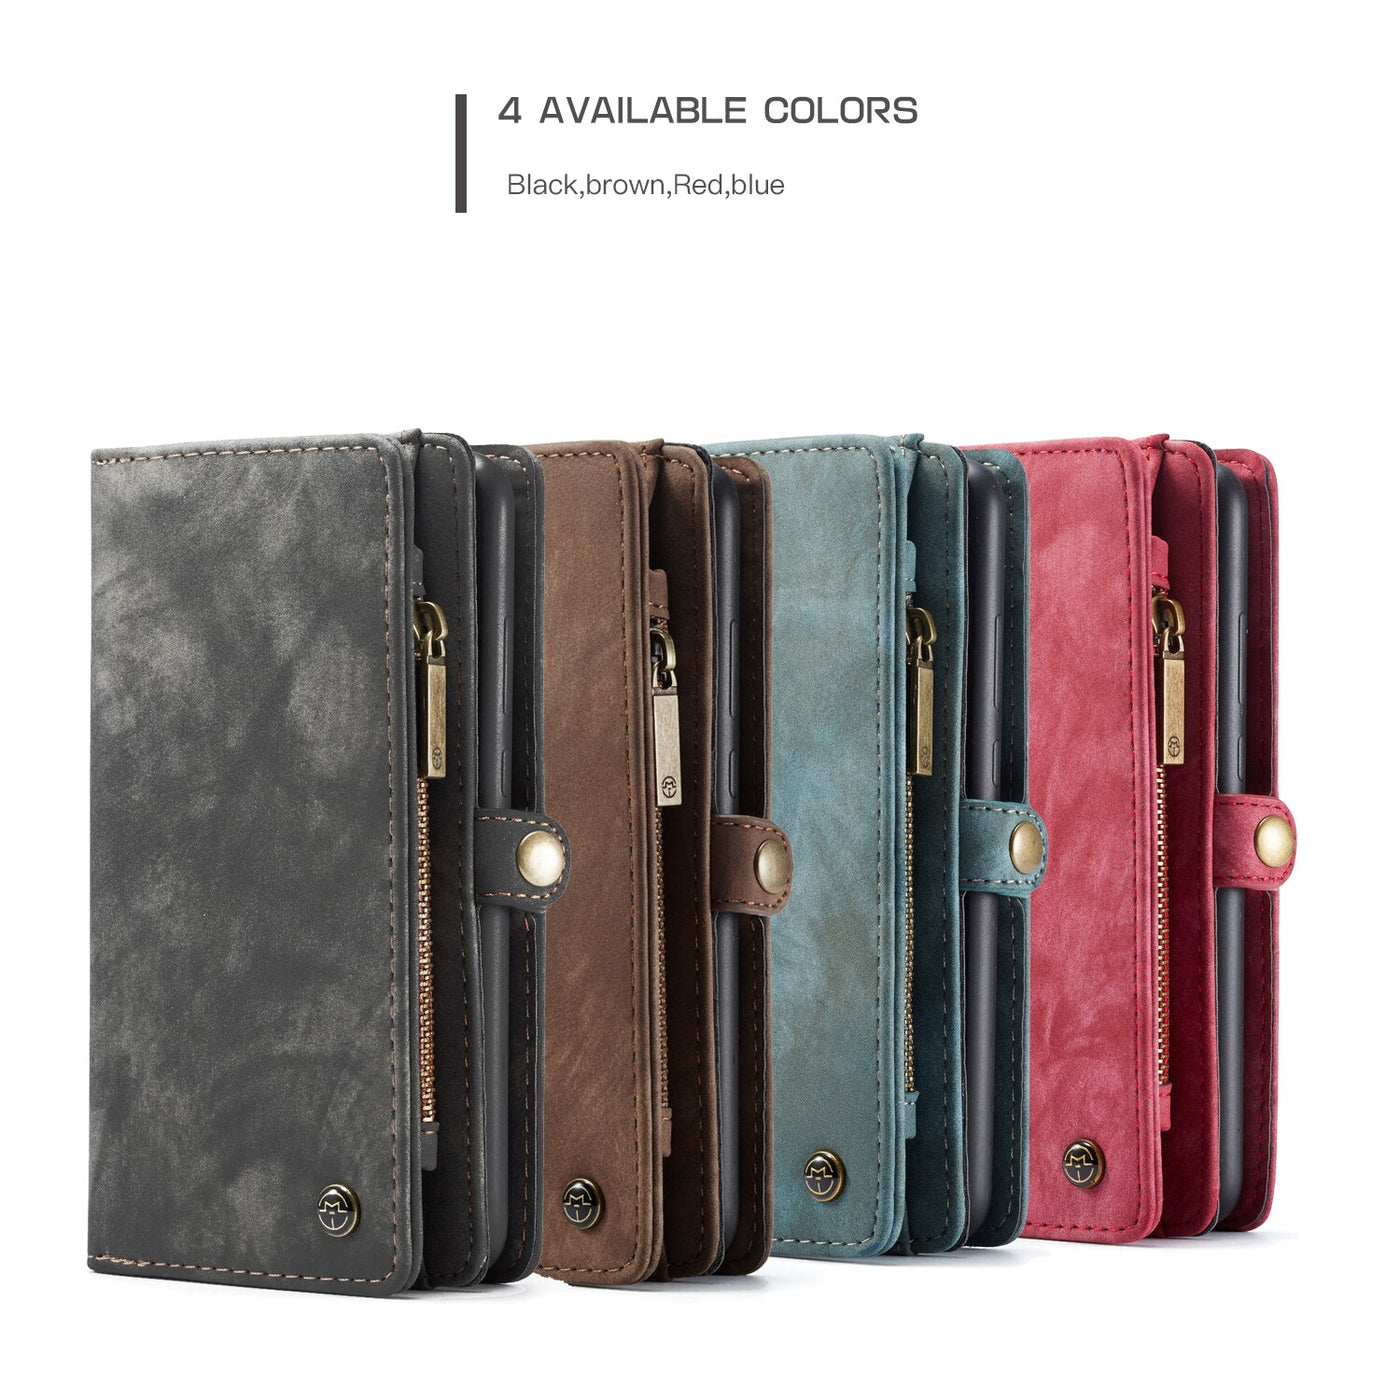 Multifunctional Wallet Covers With Detachable Back Covers